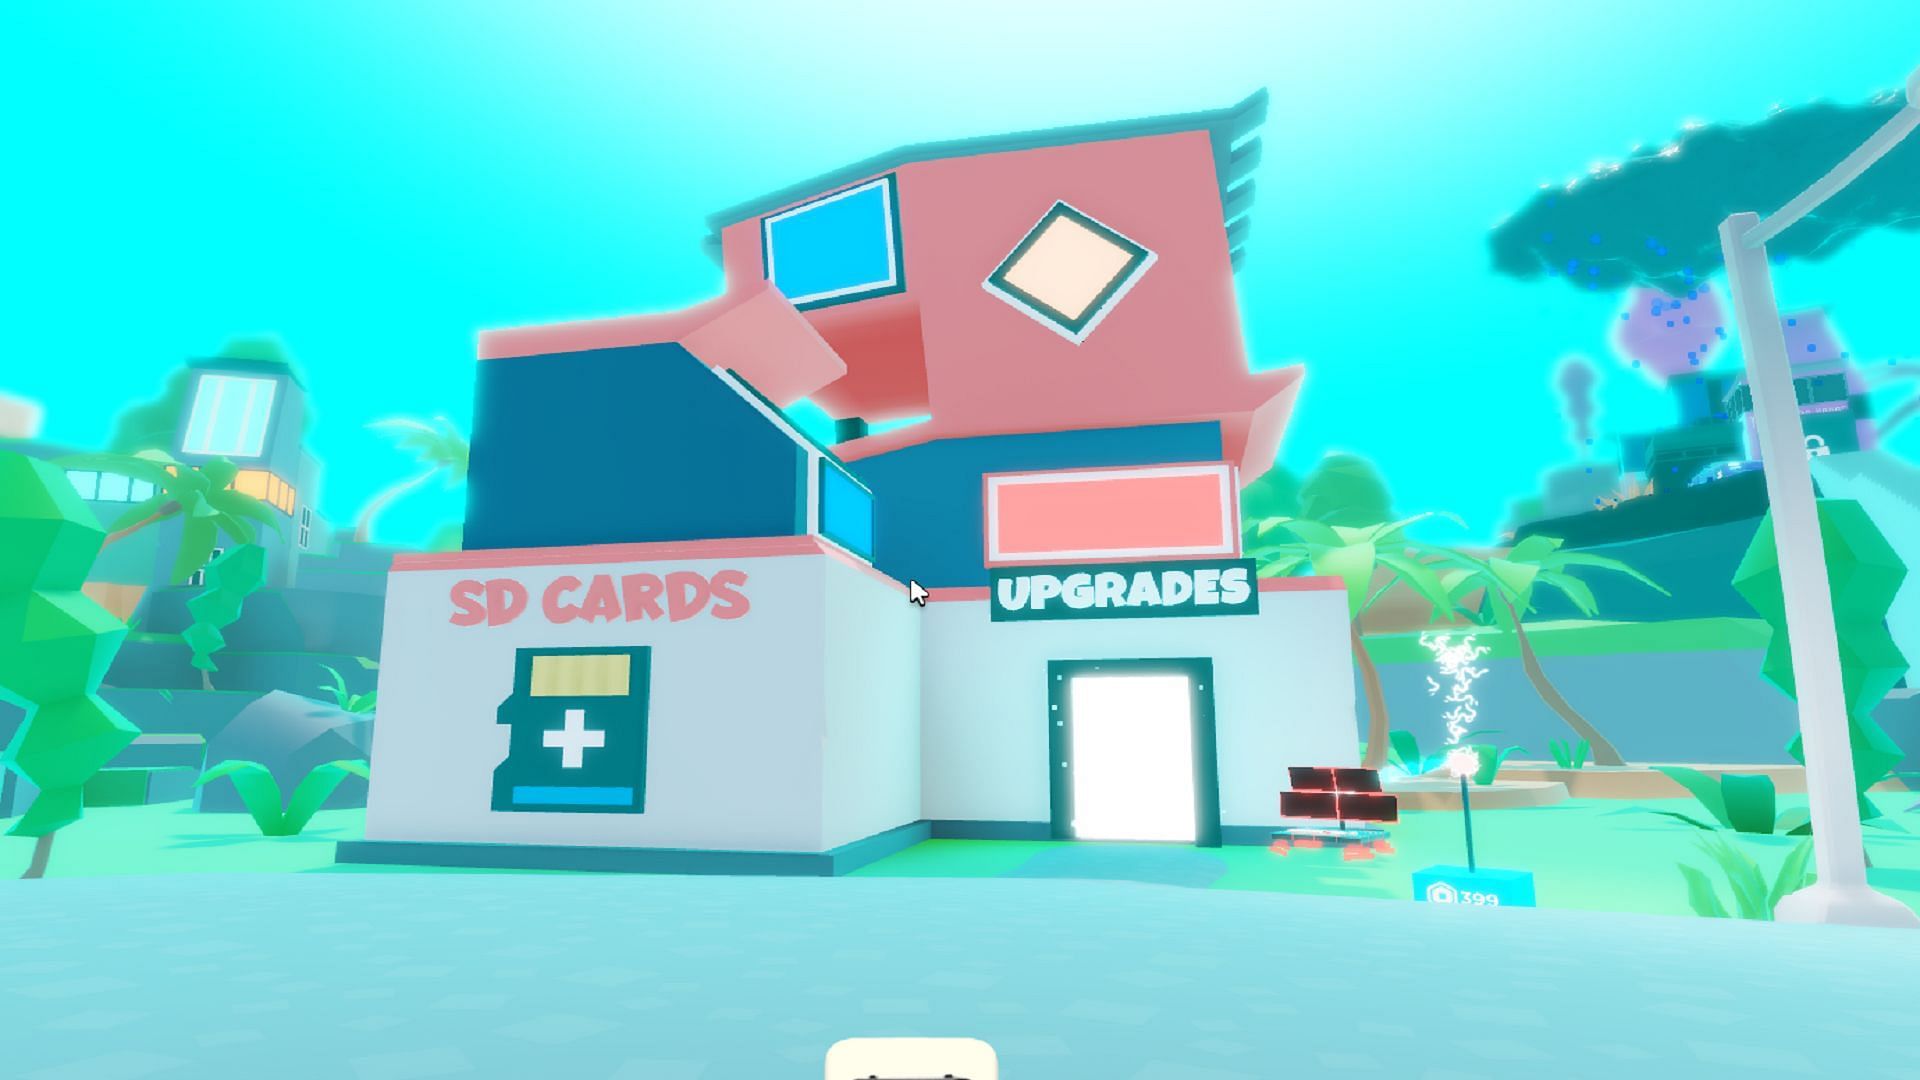 The Upgrades store has better PCs and recording devices (Image via Roblox)